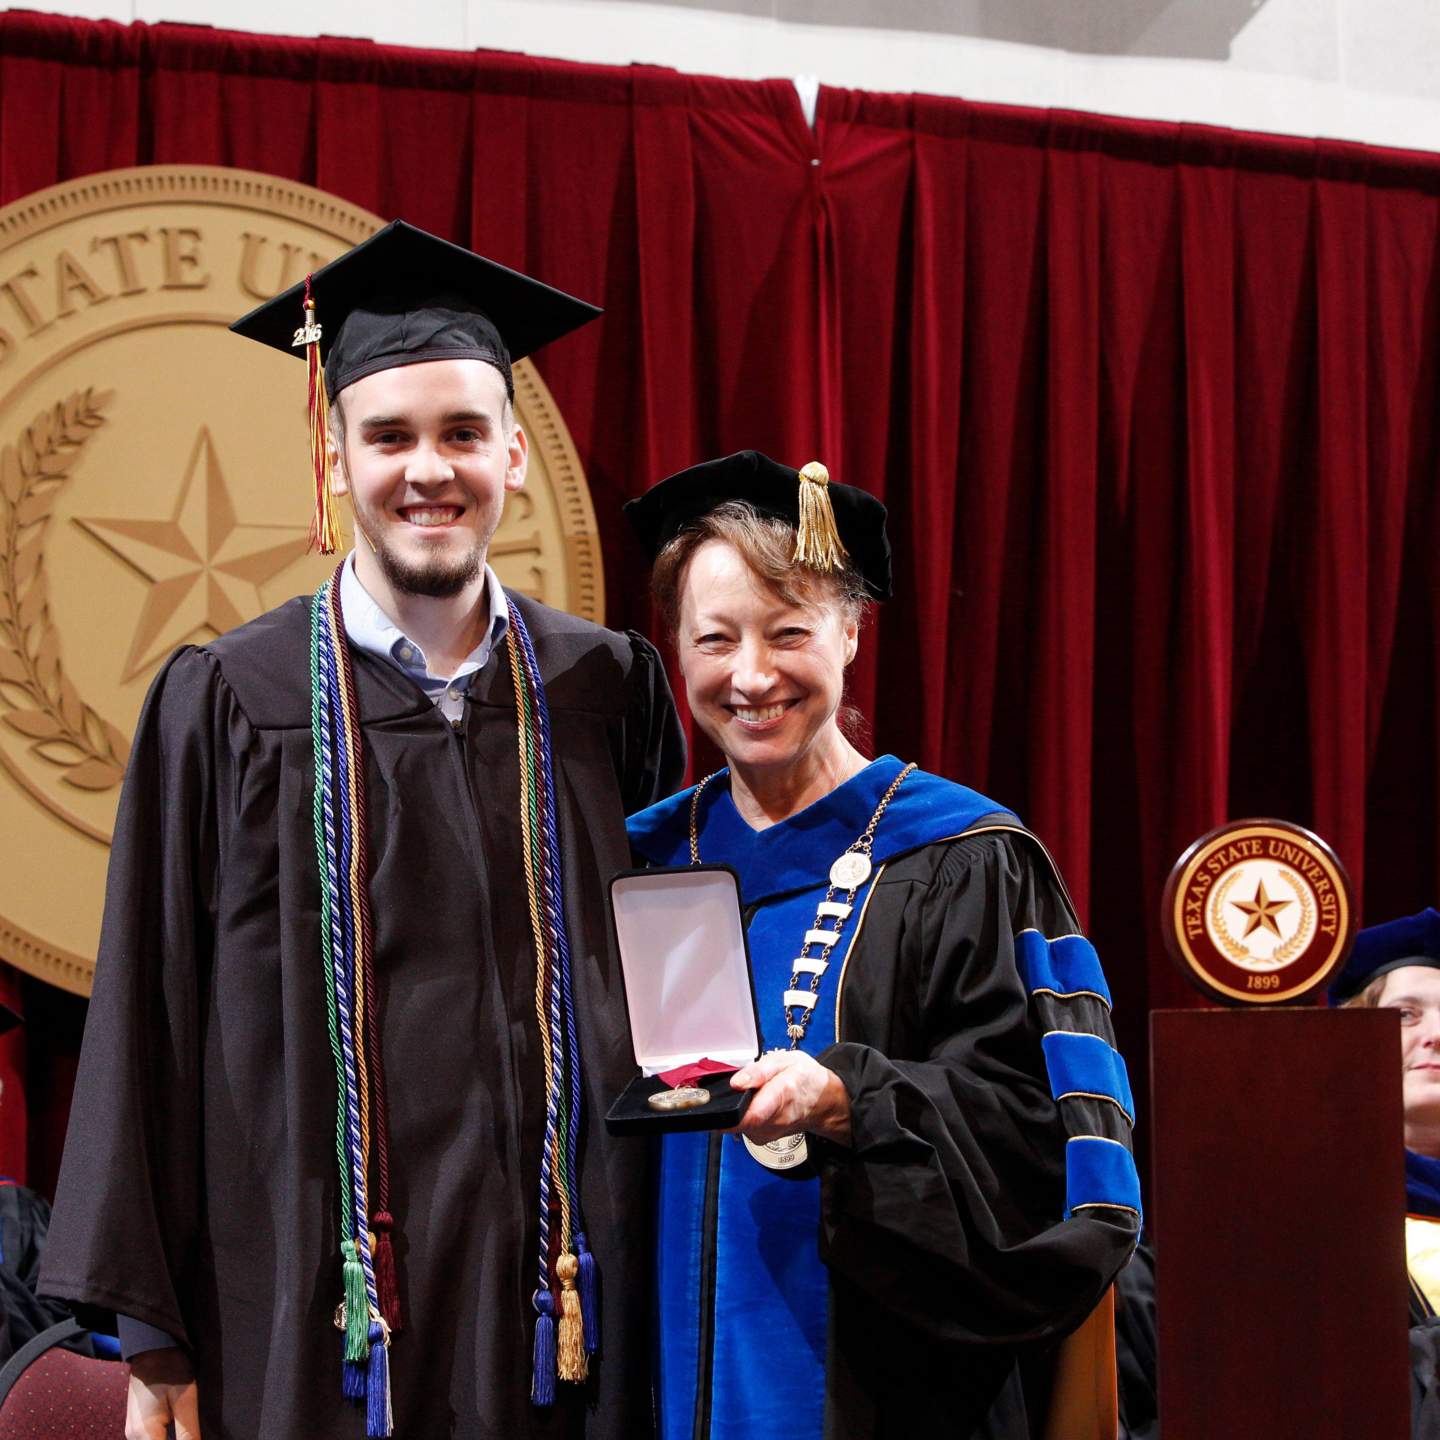 Mr. Hayden Marshal Payne receives the LBJ Outstanding Senior Student Award from President Denise M Trauth at a Spring 2016 Texas State University commencement ceremony.